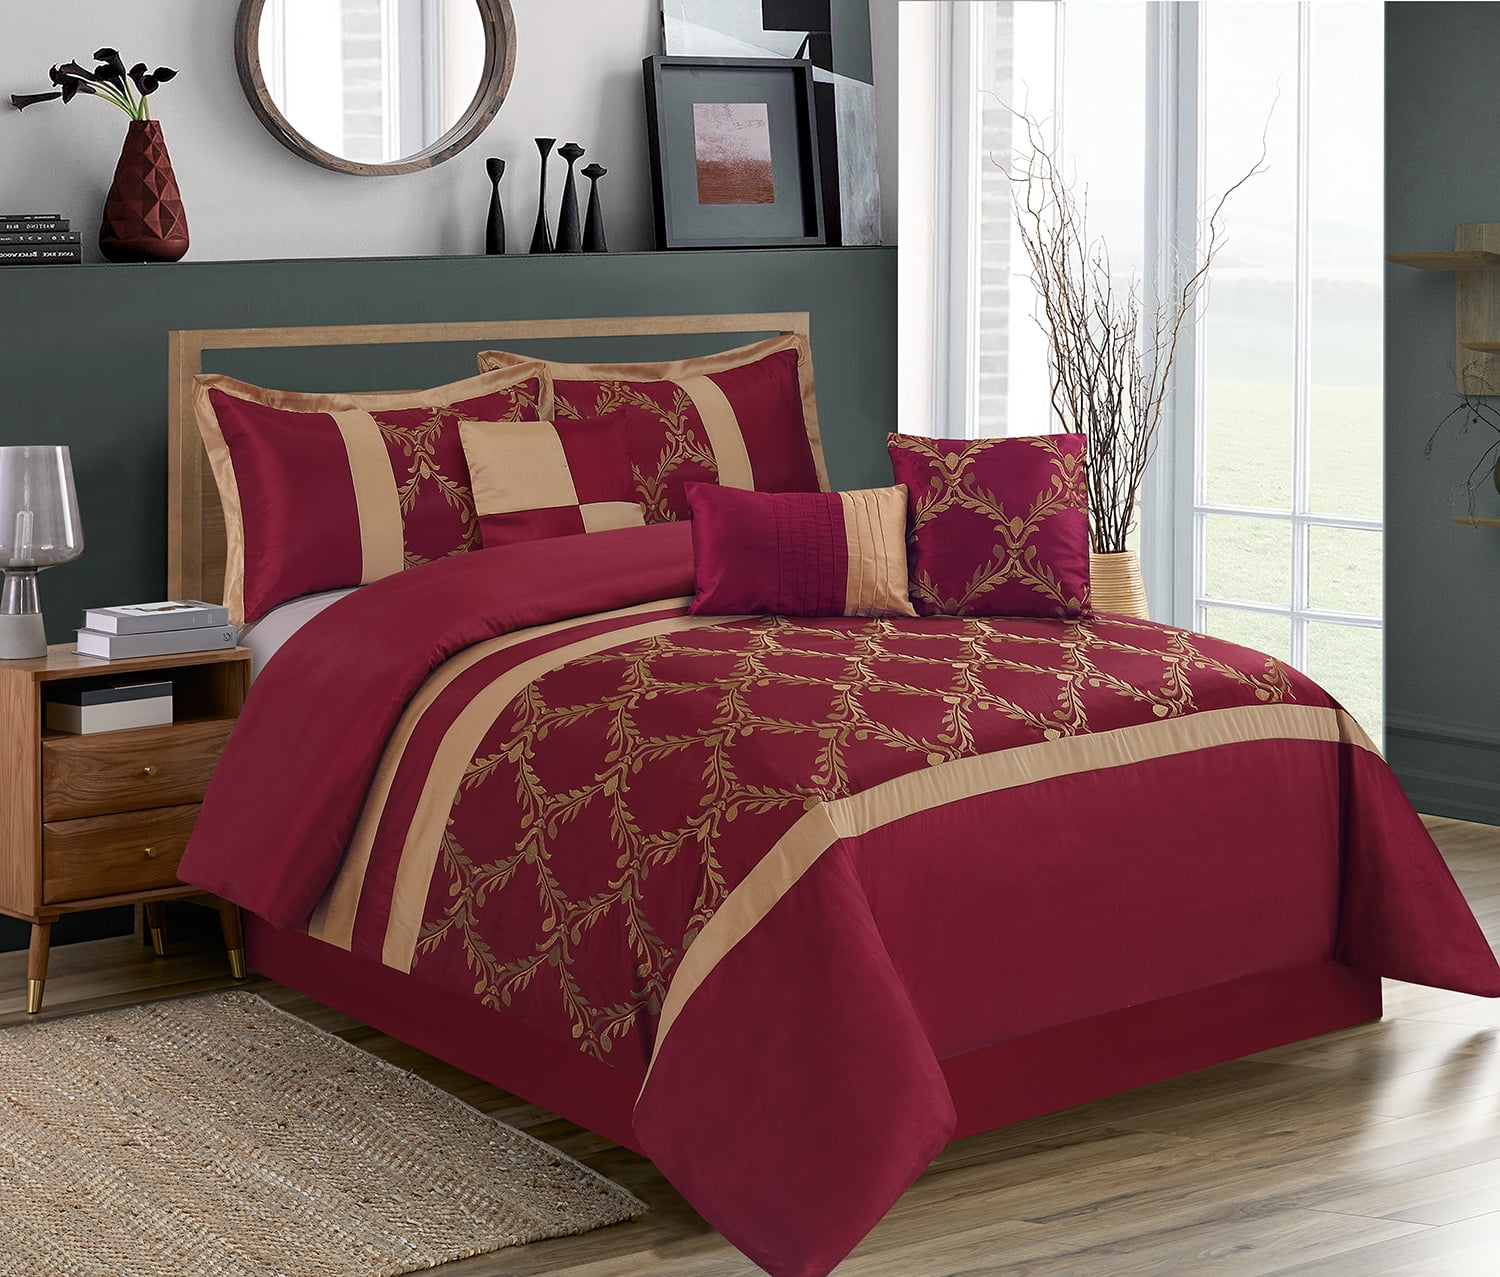 DCP 7Pcs Oversize Embroidery Comforter Set  Burgundy,king,Queen,Cal king size 